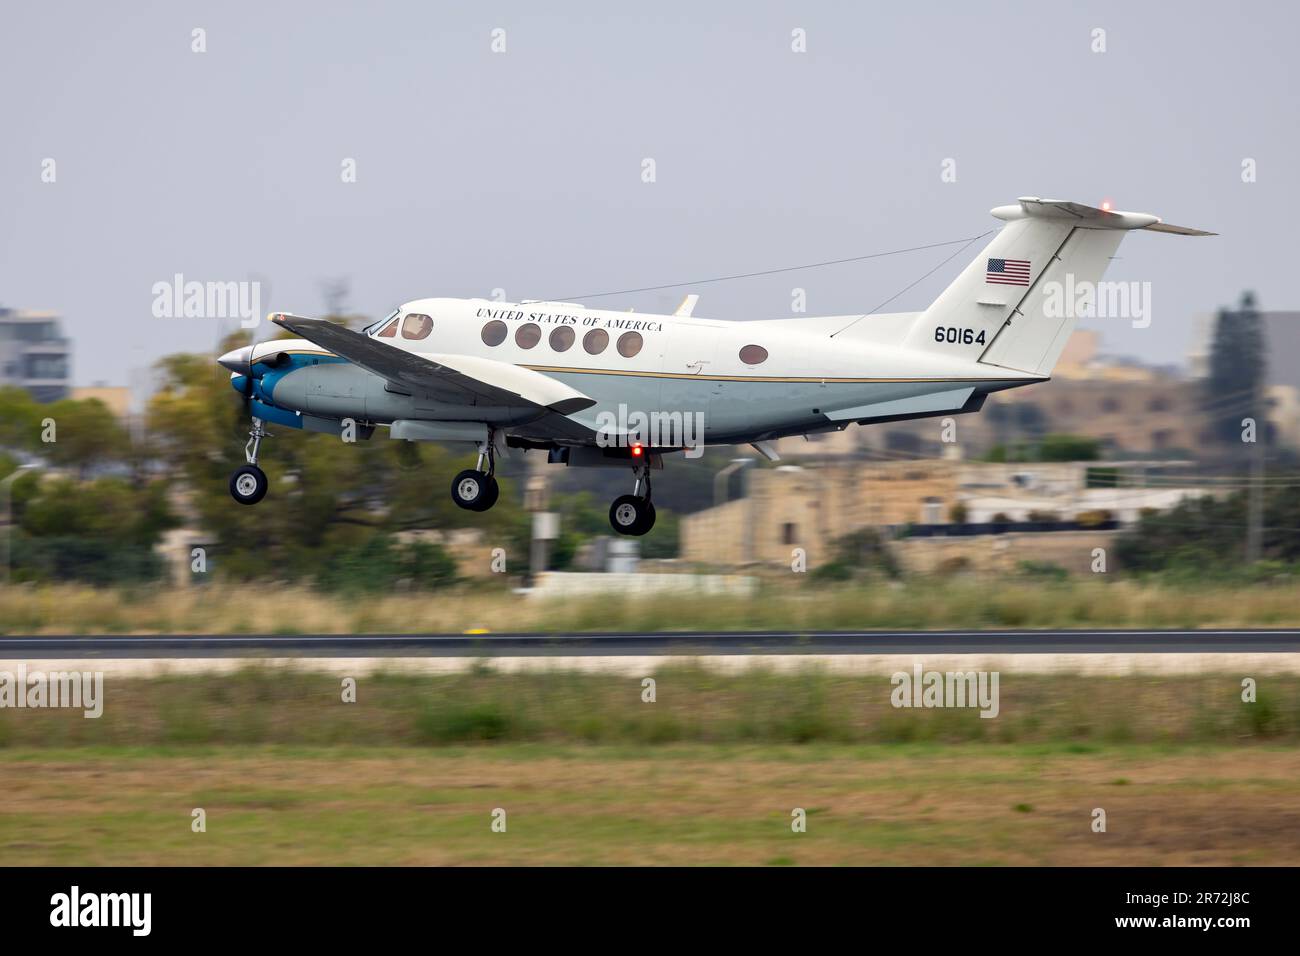 US Air Force (USAF) Beechcraft C-12C Huron (Reg: 76-0164) on finals runway 31 on a cloudy afternoon. Stock Photo